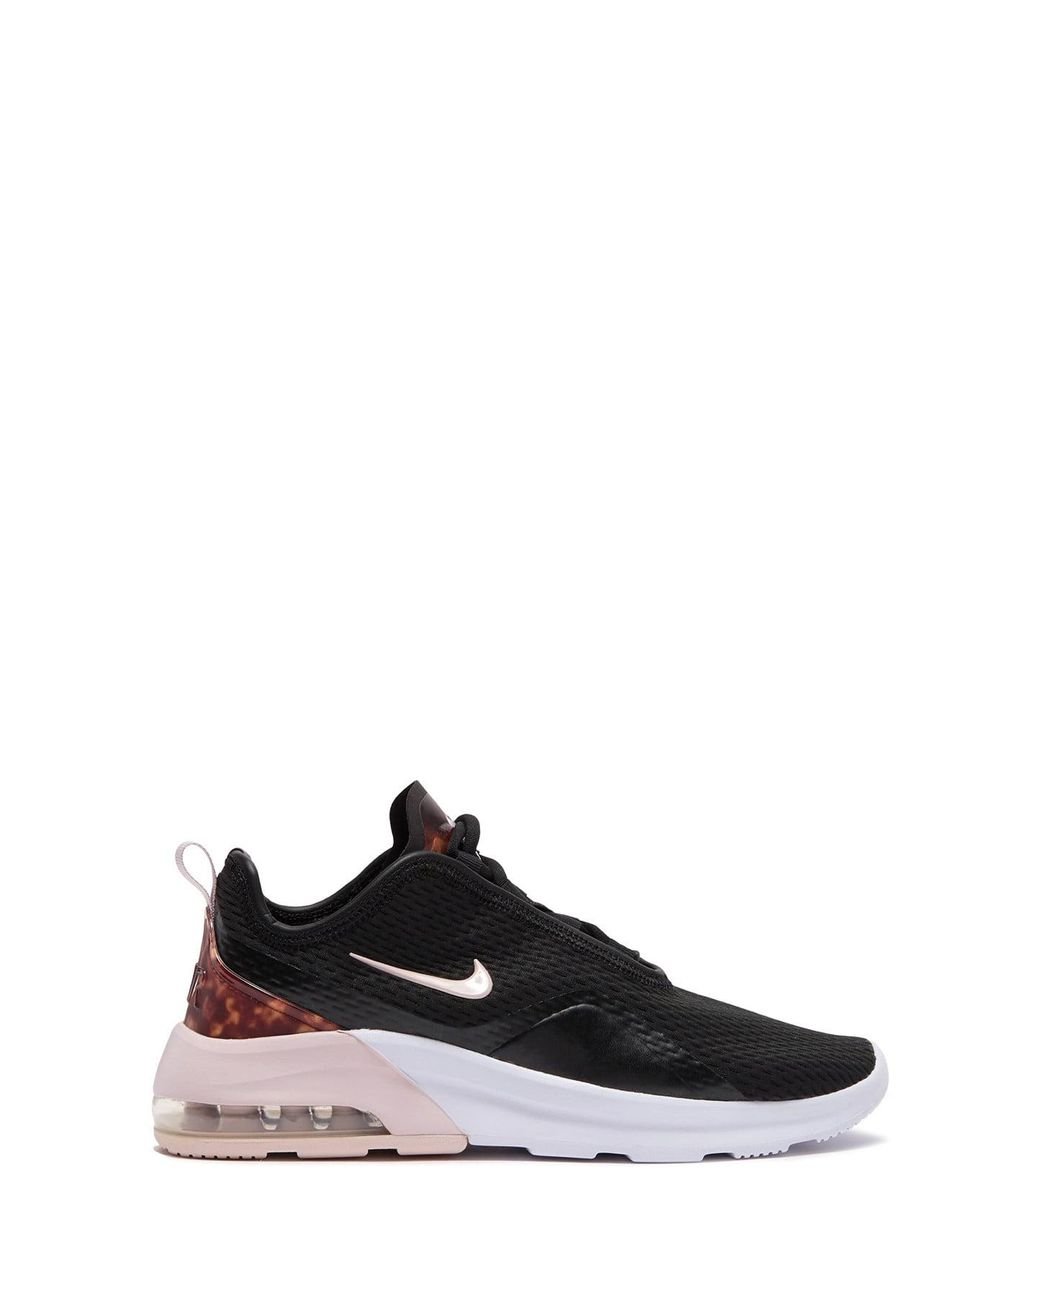 Nike Air Max Motion 2 Shoes in Black | Lyst